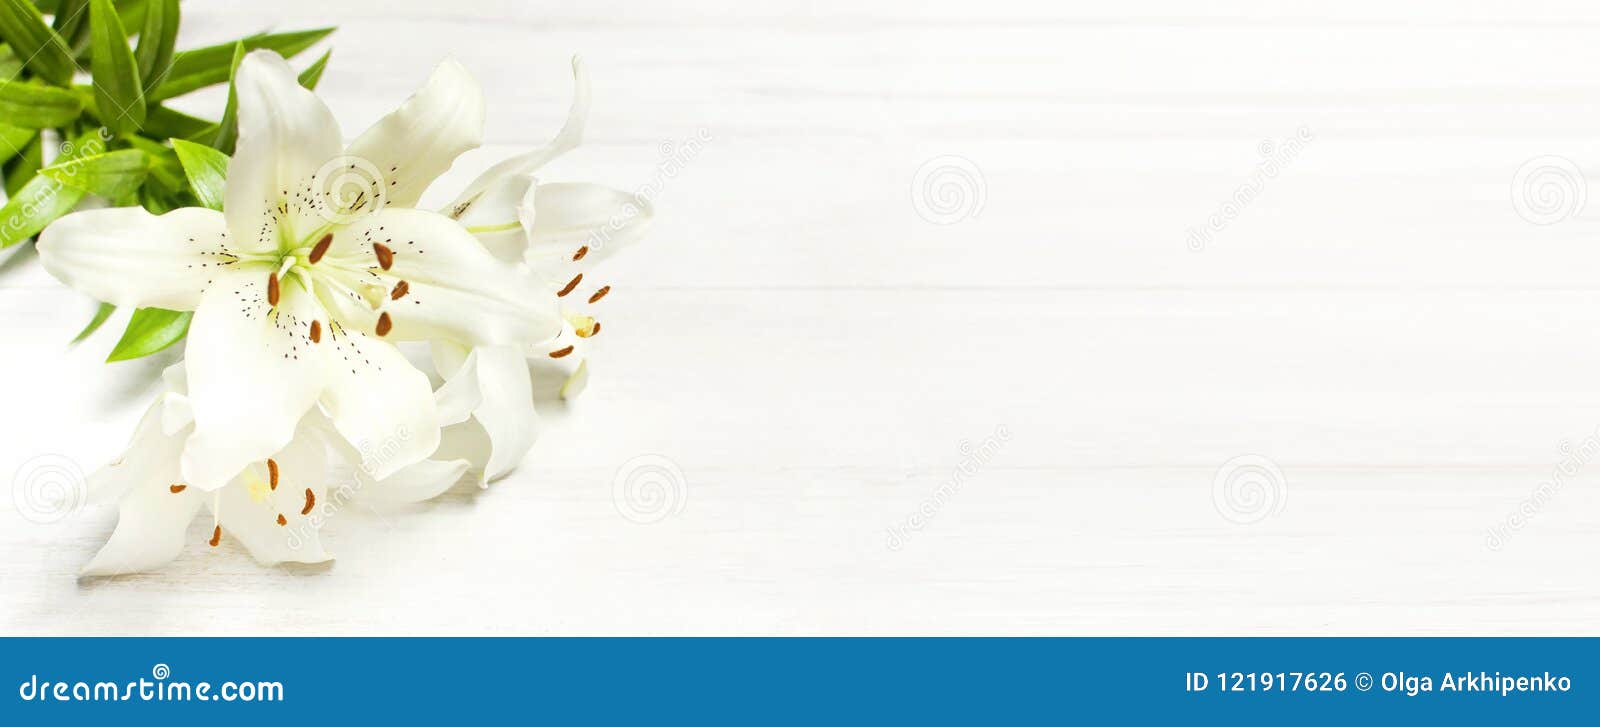 bouquet of white lilies on a white wooden background top view. flowers lily beautiful bouquet white flowers